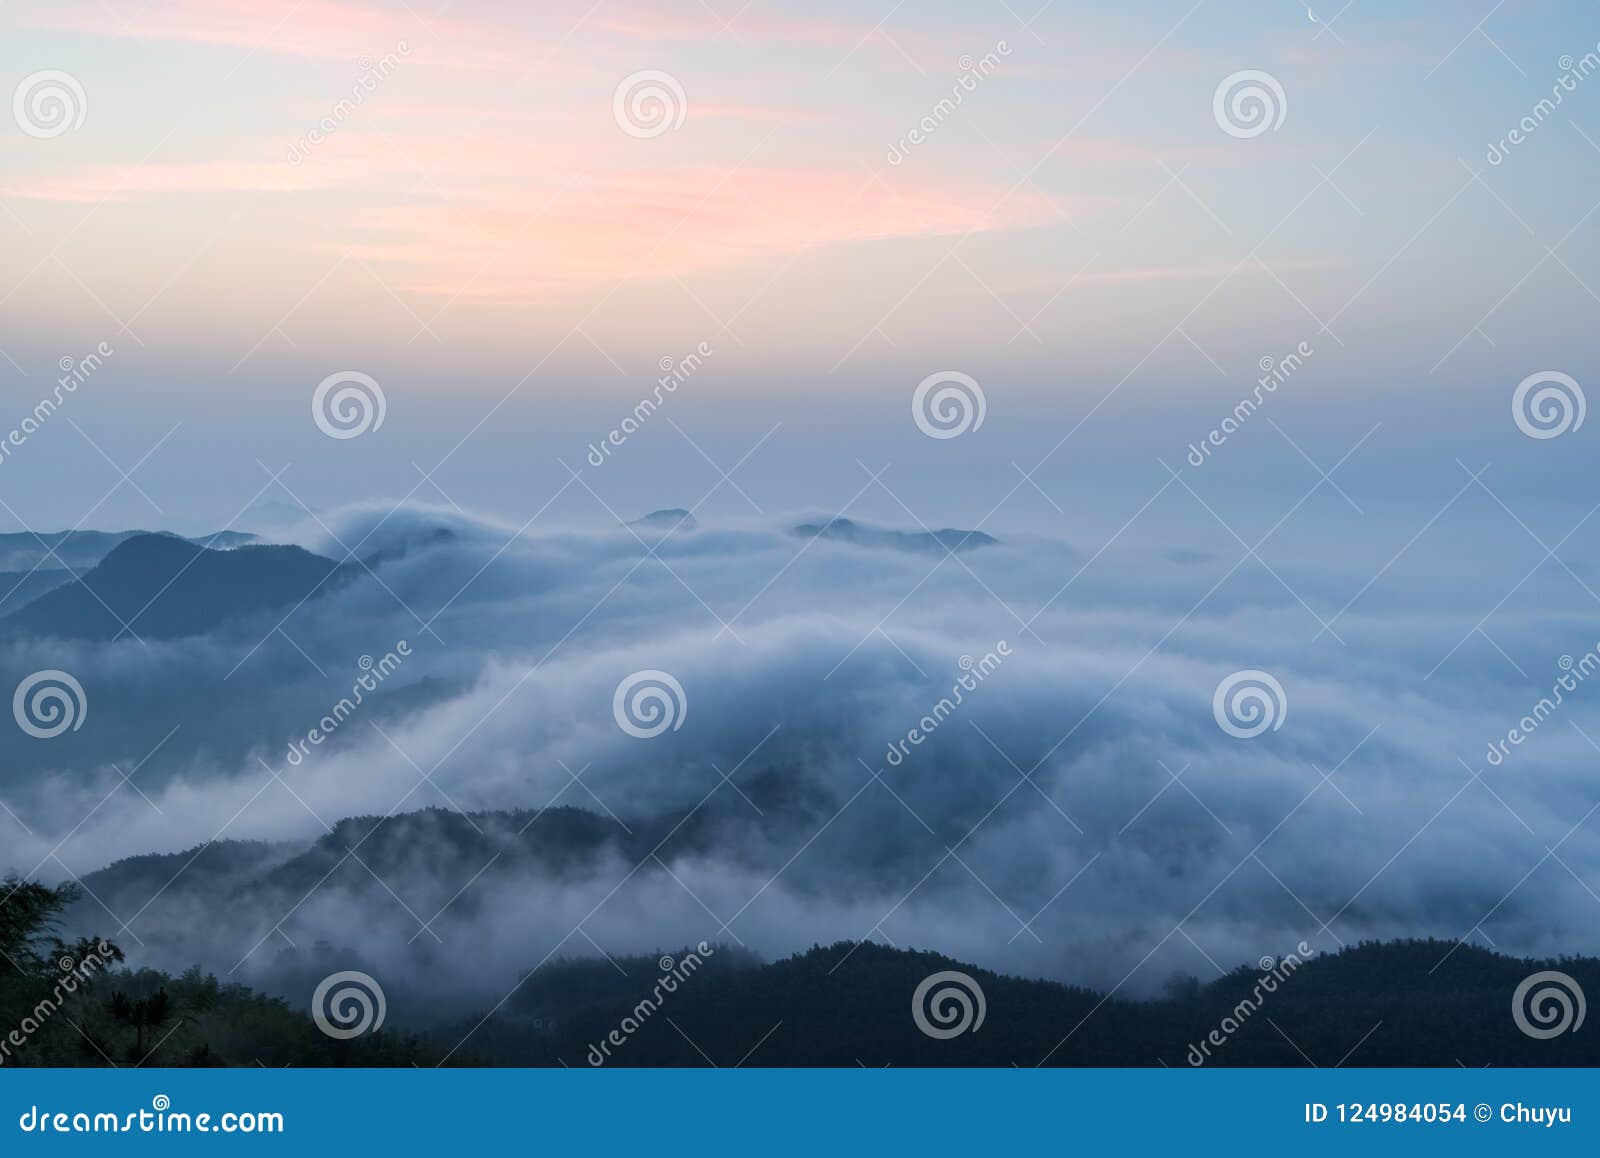 Morning Glow And Clouds Fog In The Mountains Stock Photo Image Of Scenic Forest